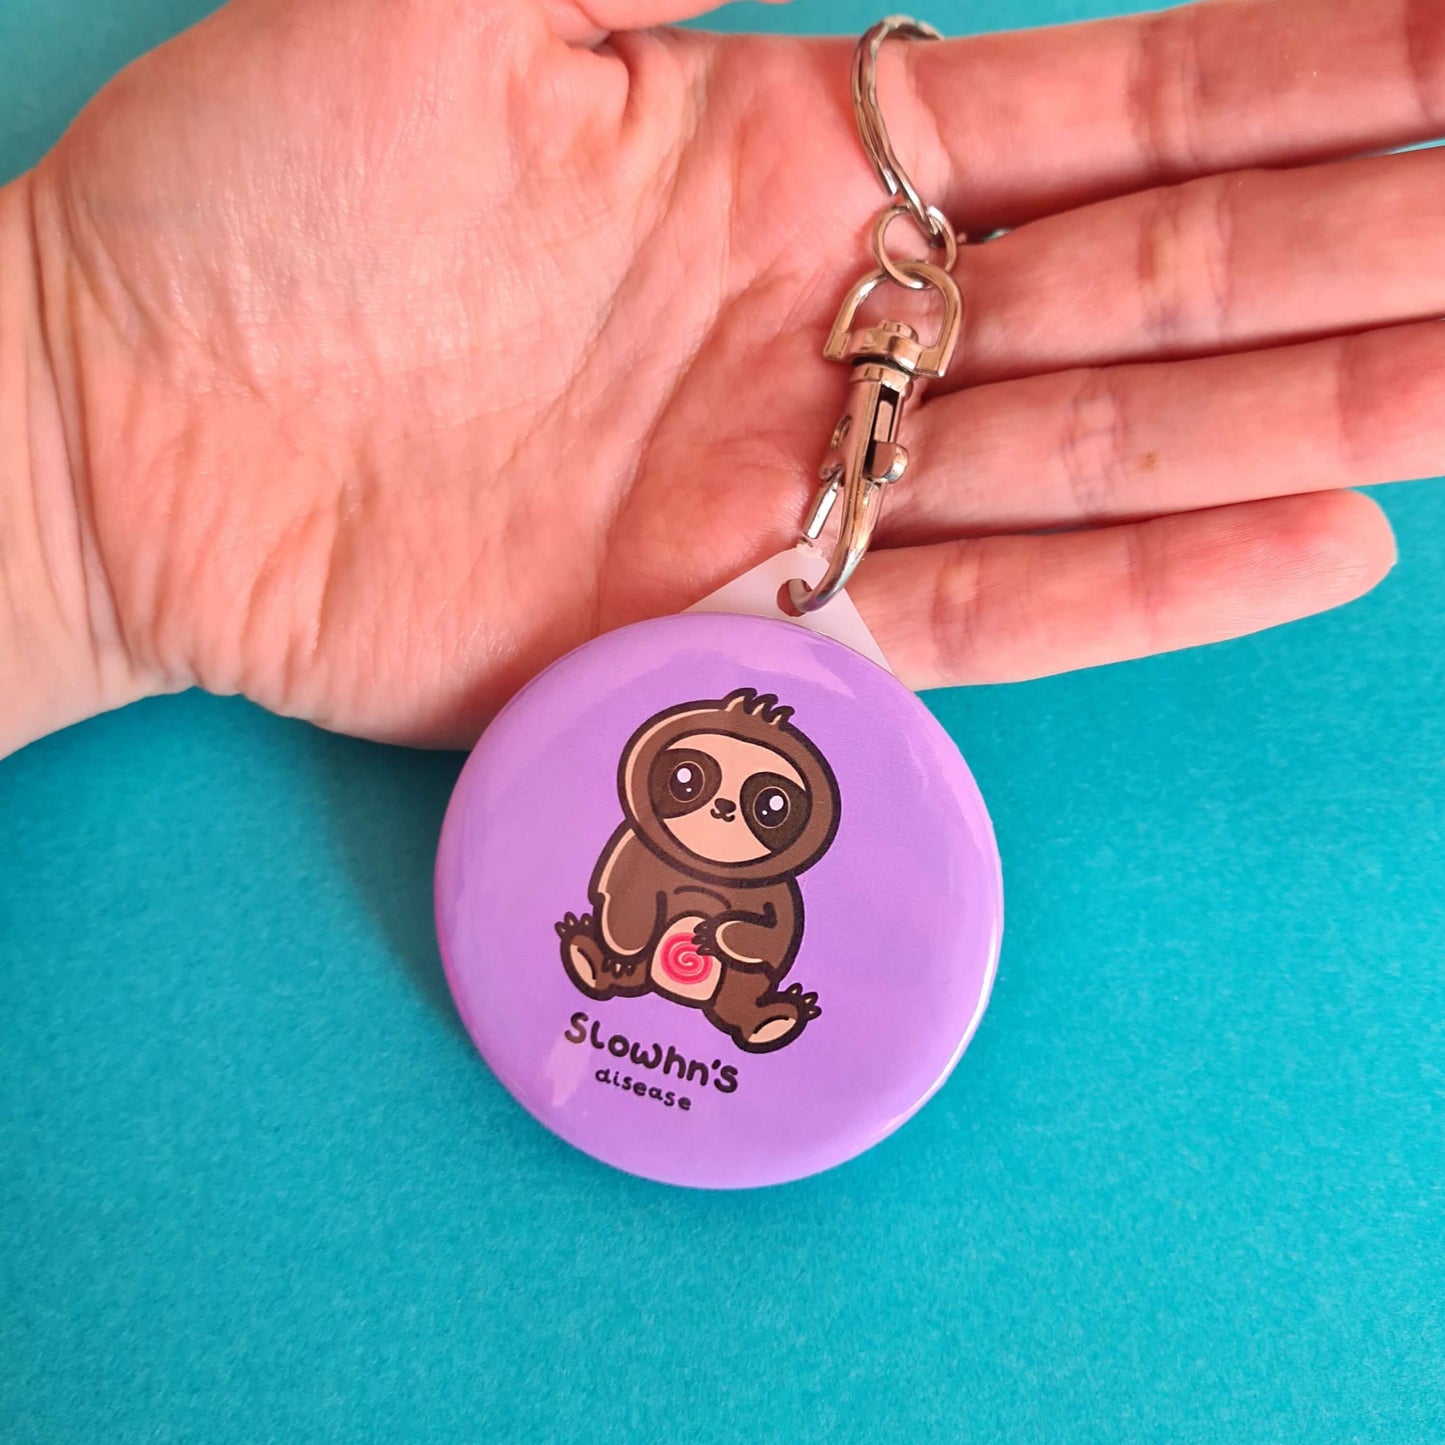 The Slowhn's Disease Sloth Keyring - Crohn's Disease held on a blue background. The silver lobster clip pink plastic circular keyring of a smiling sat down brown sloth clutching its swirly red tummy and black text underneath reading 'slowhn's disease'. The hand made design is raising awareness for crohn's disease.